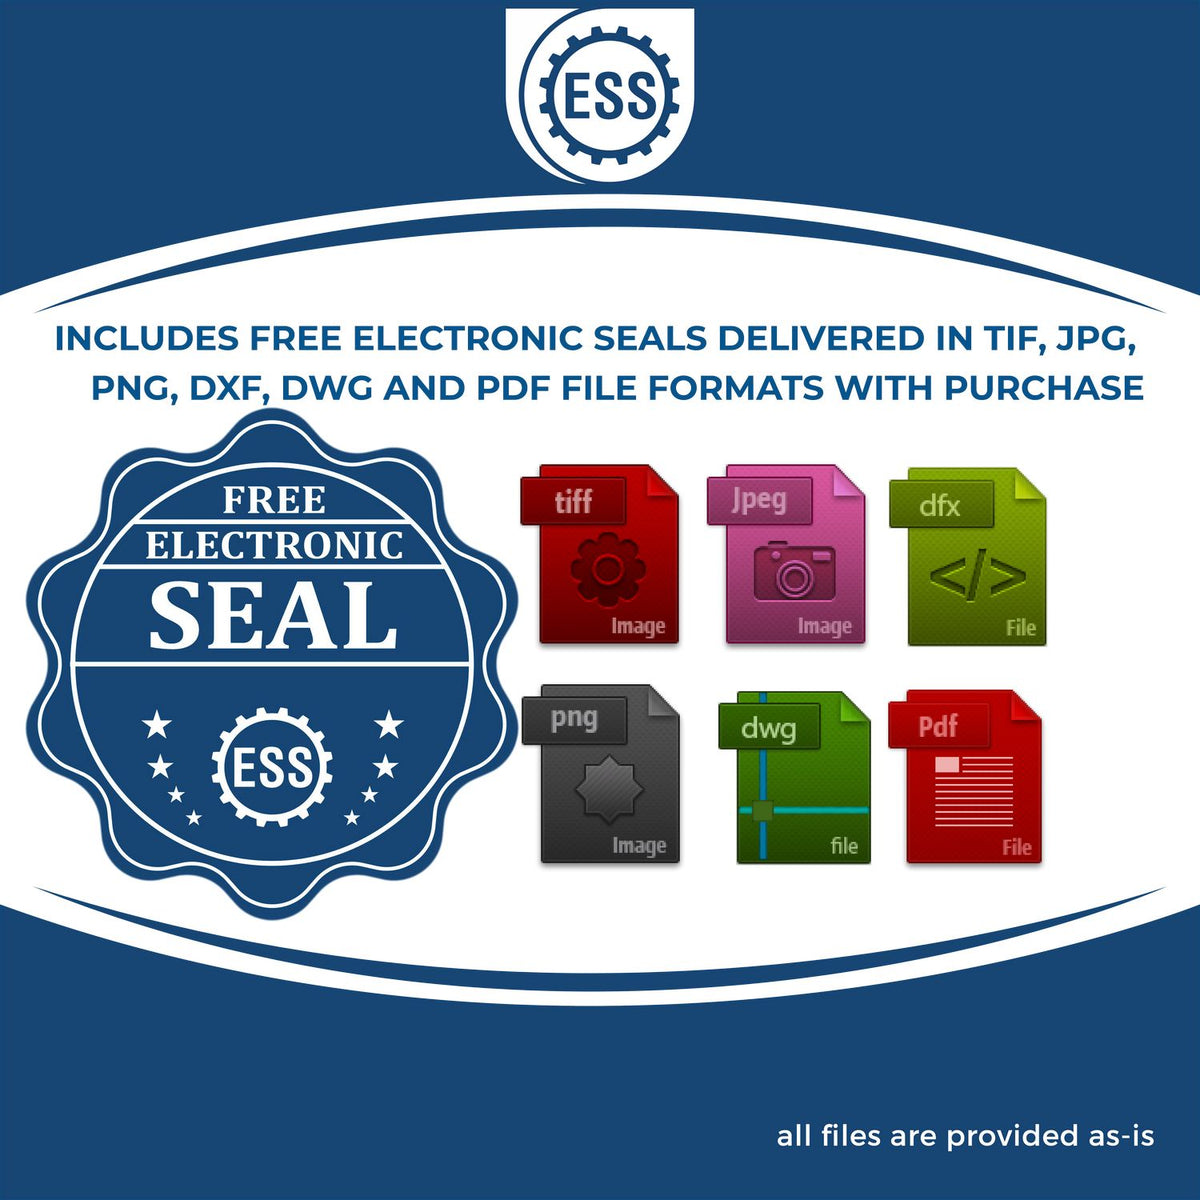 An infographic for the free electronic seal for the Hybrid Maine Engineer Seal illustrating the different file type icons such as DXF, DWG, TIF, JPG and PNG.